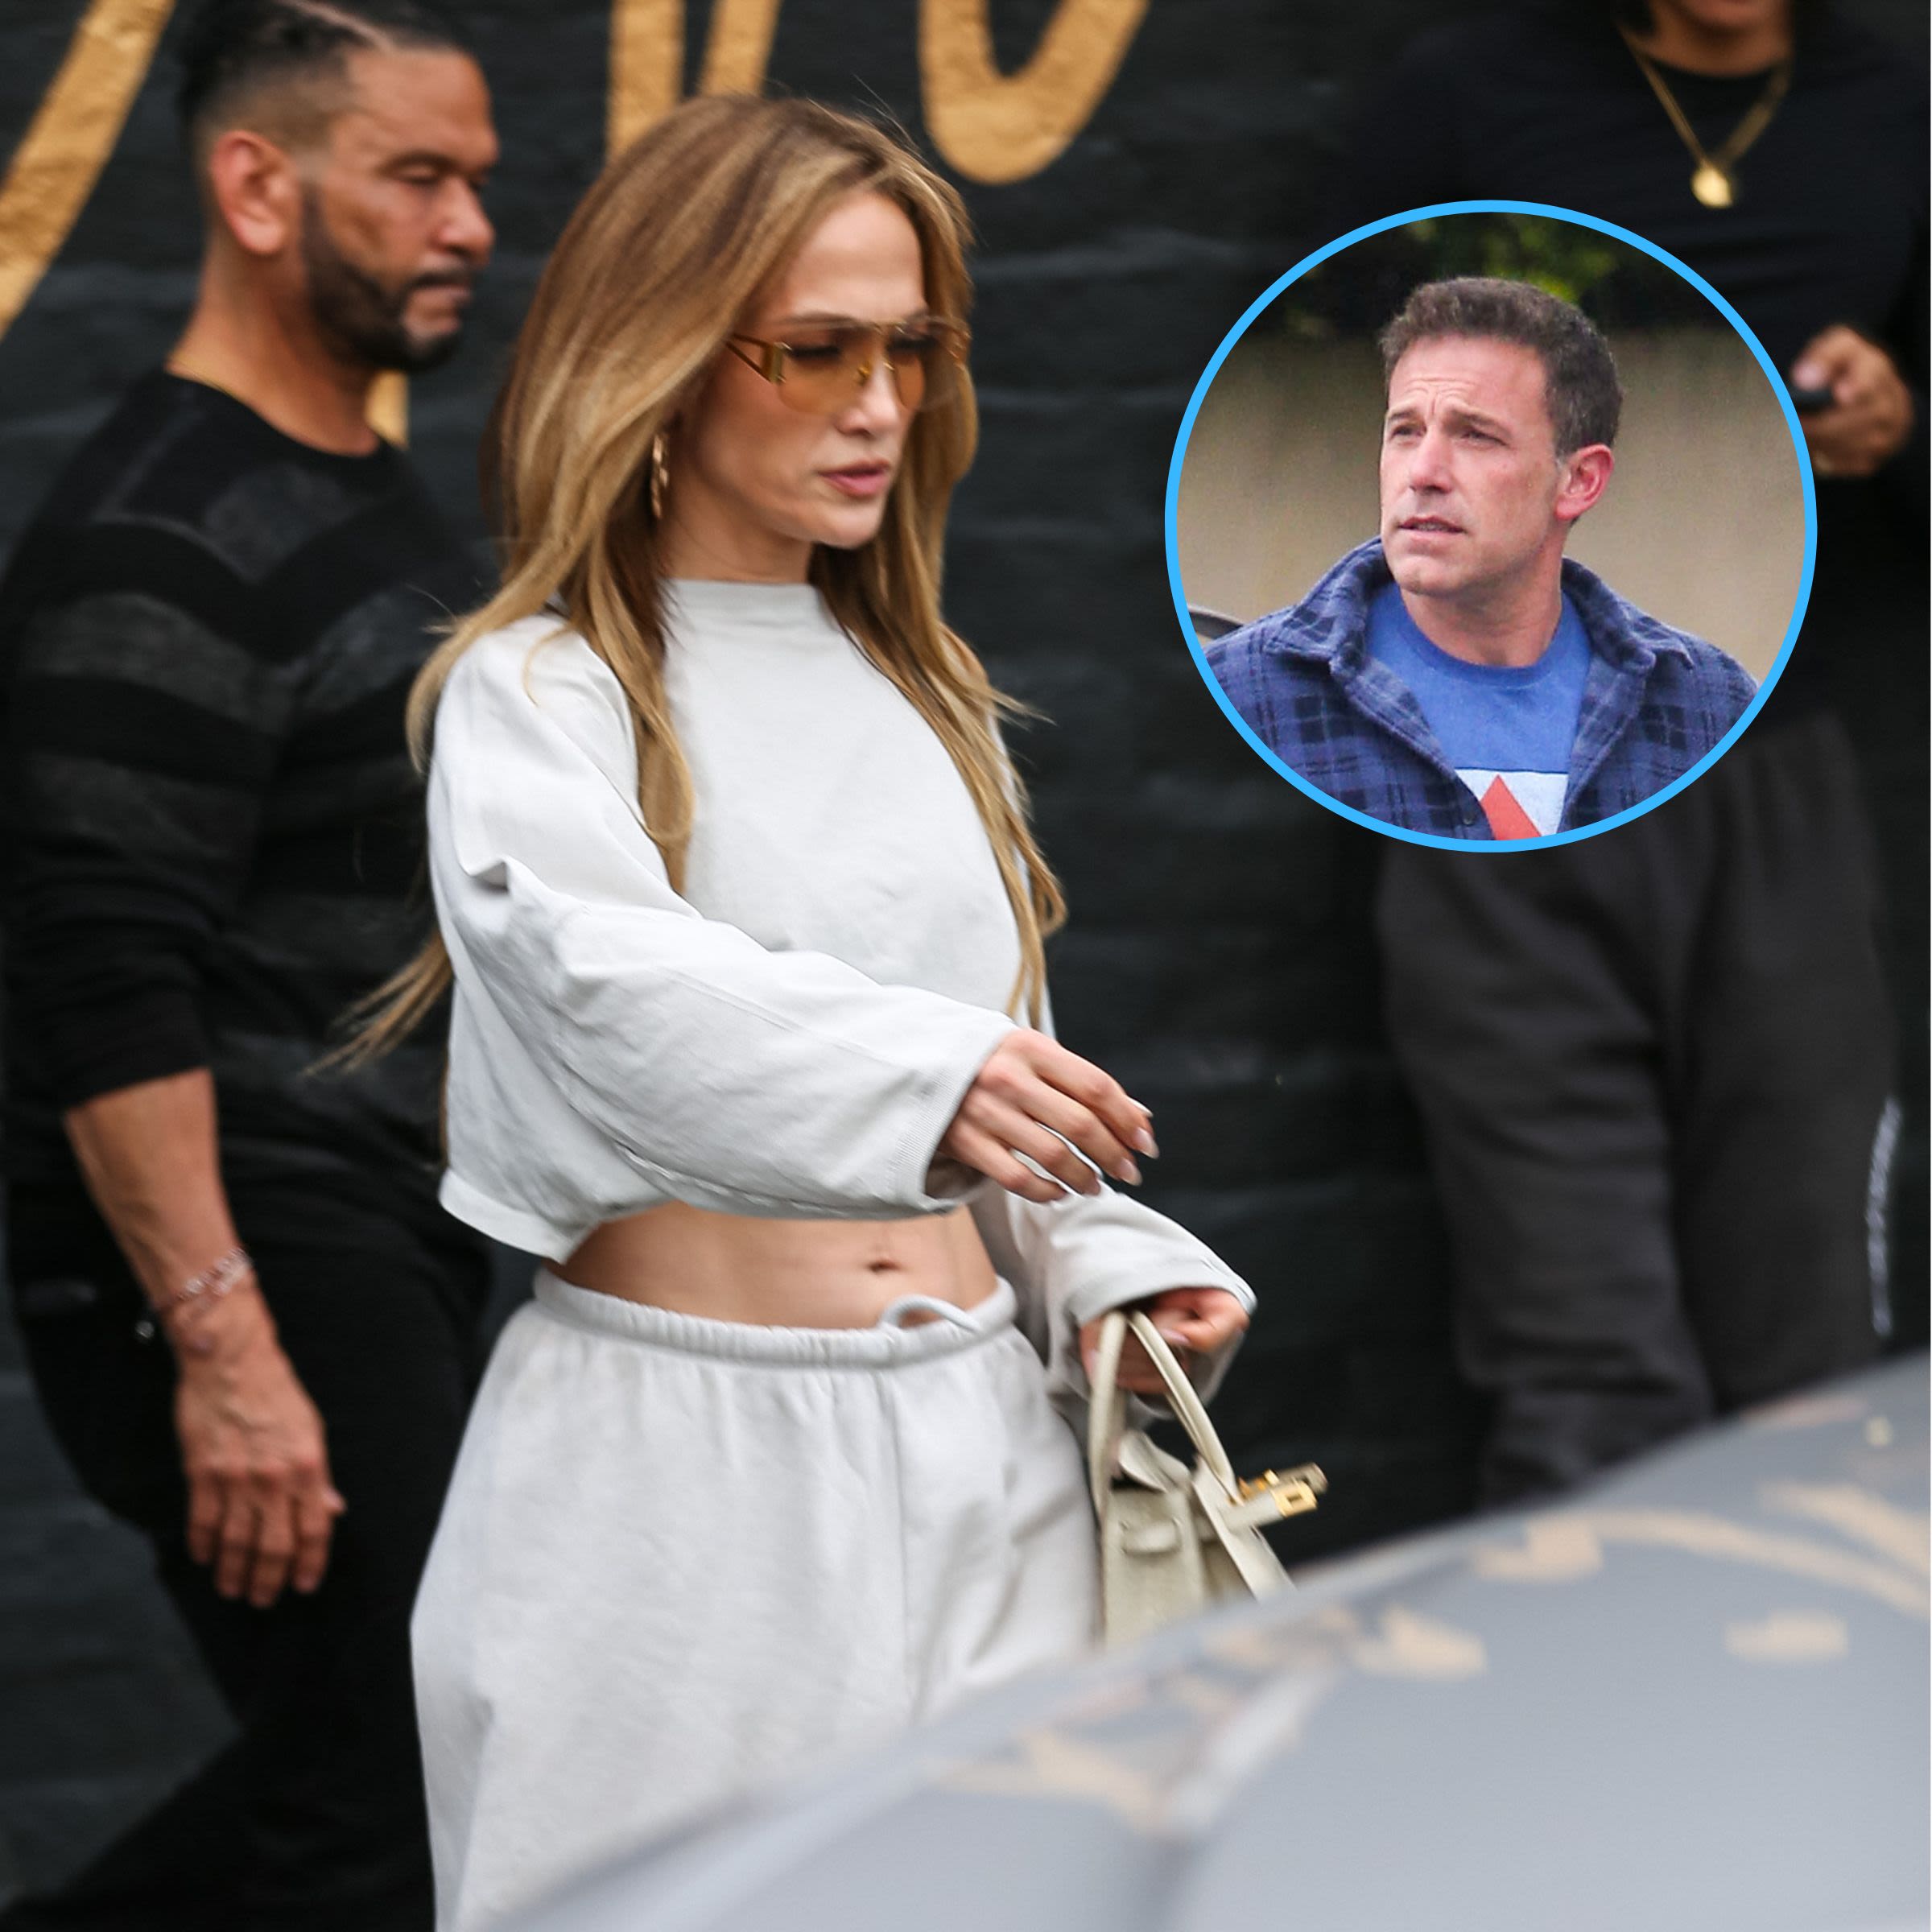 Jennifer Lopez Spotted Looking Glum Amid Ben Affleck Marital Issues and Canceled Tour